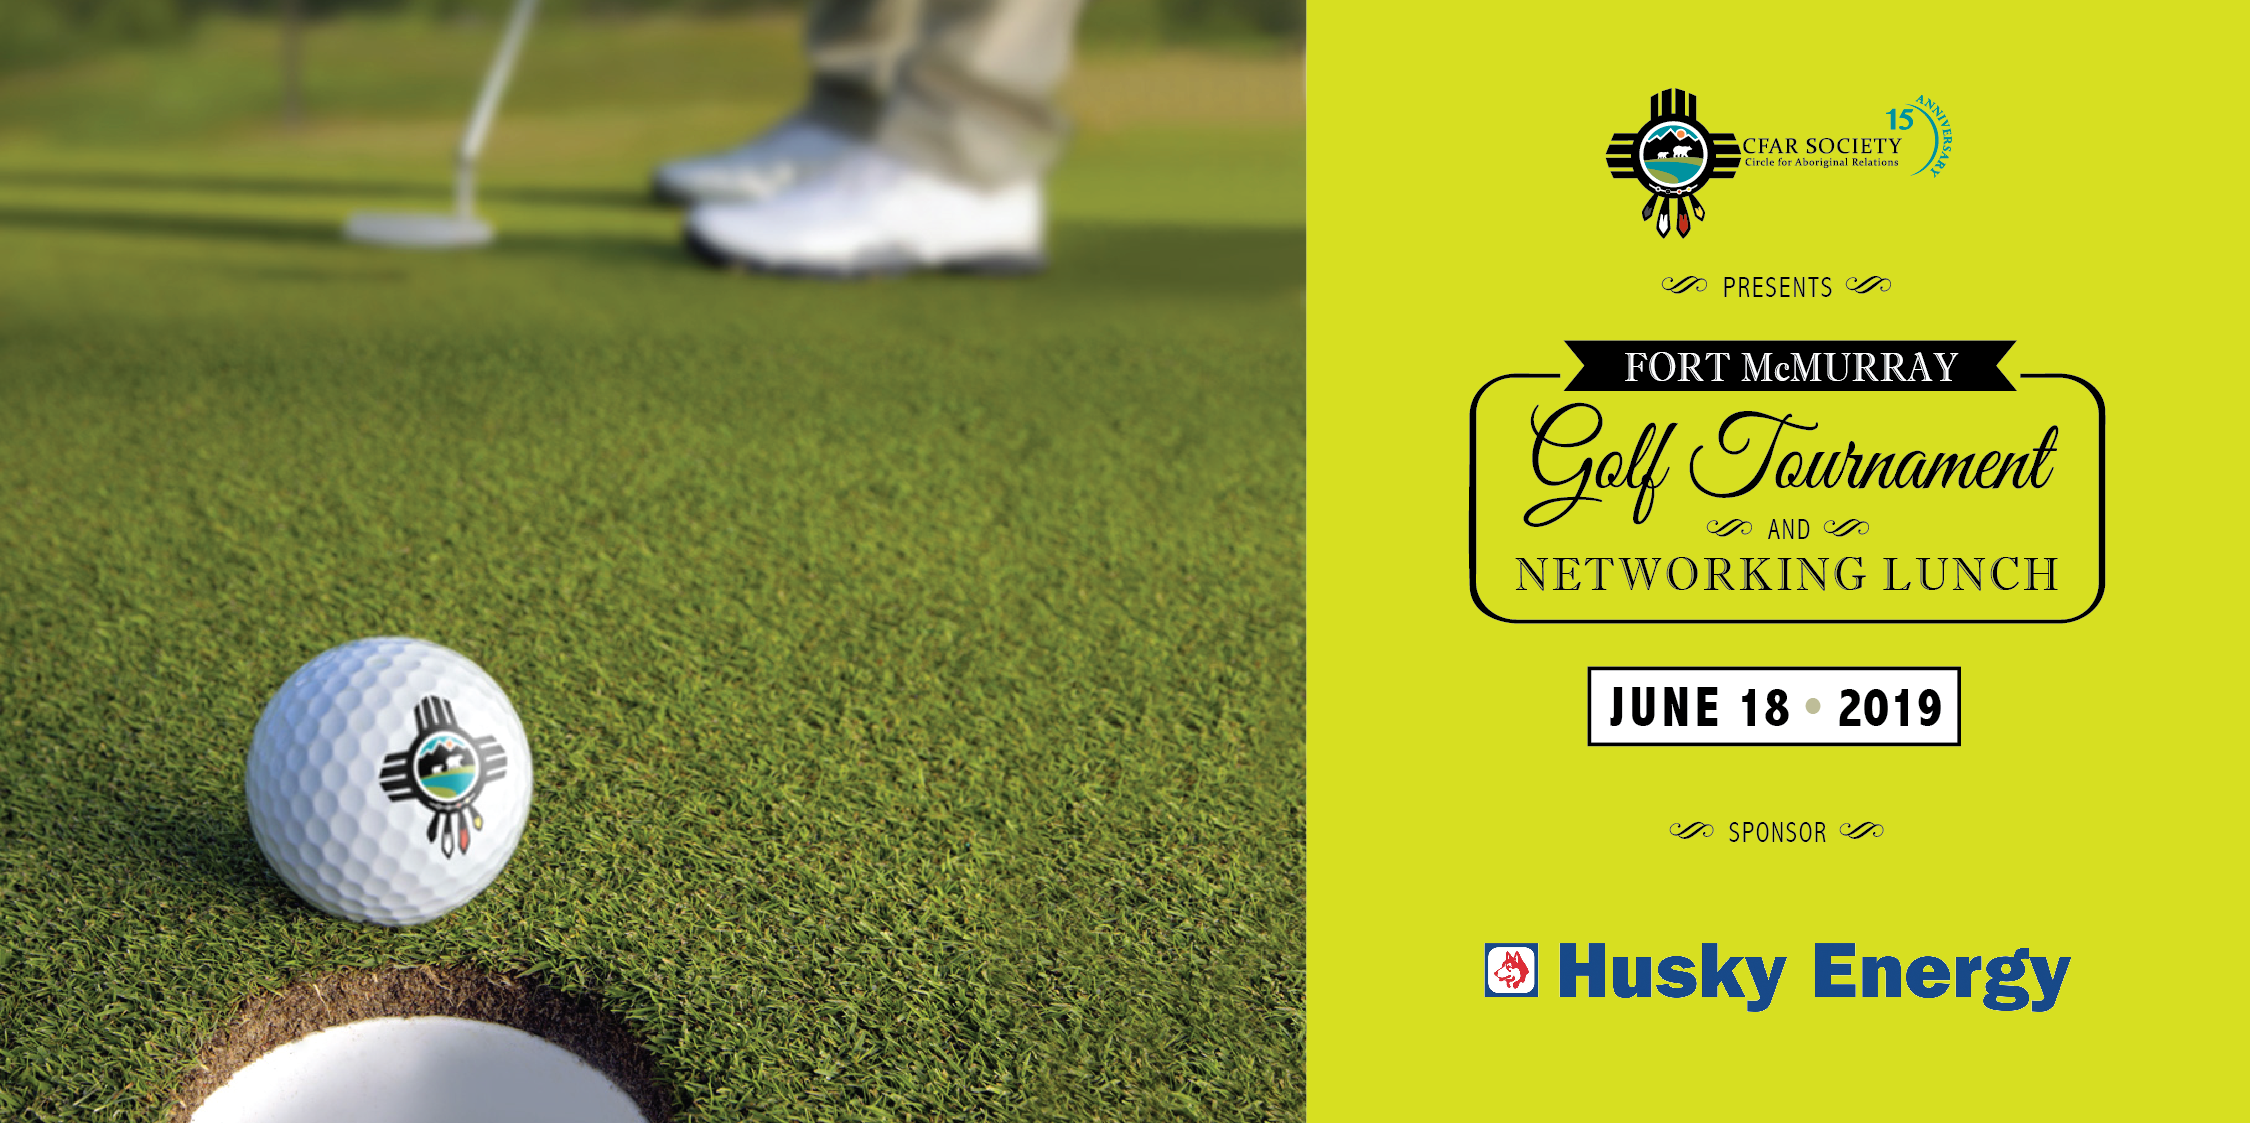 CFAR Society's Fort McMurray Golf Tournament and Networking Lunch